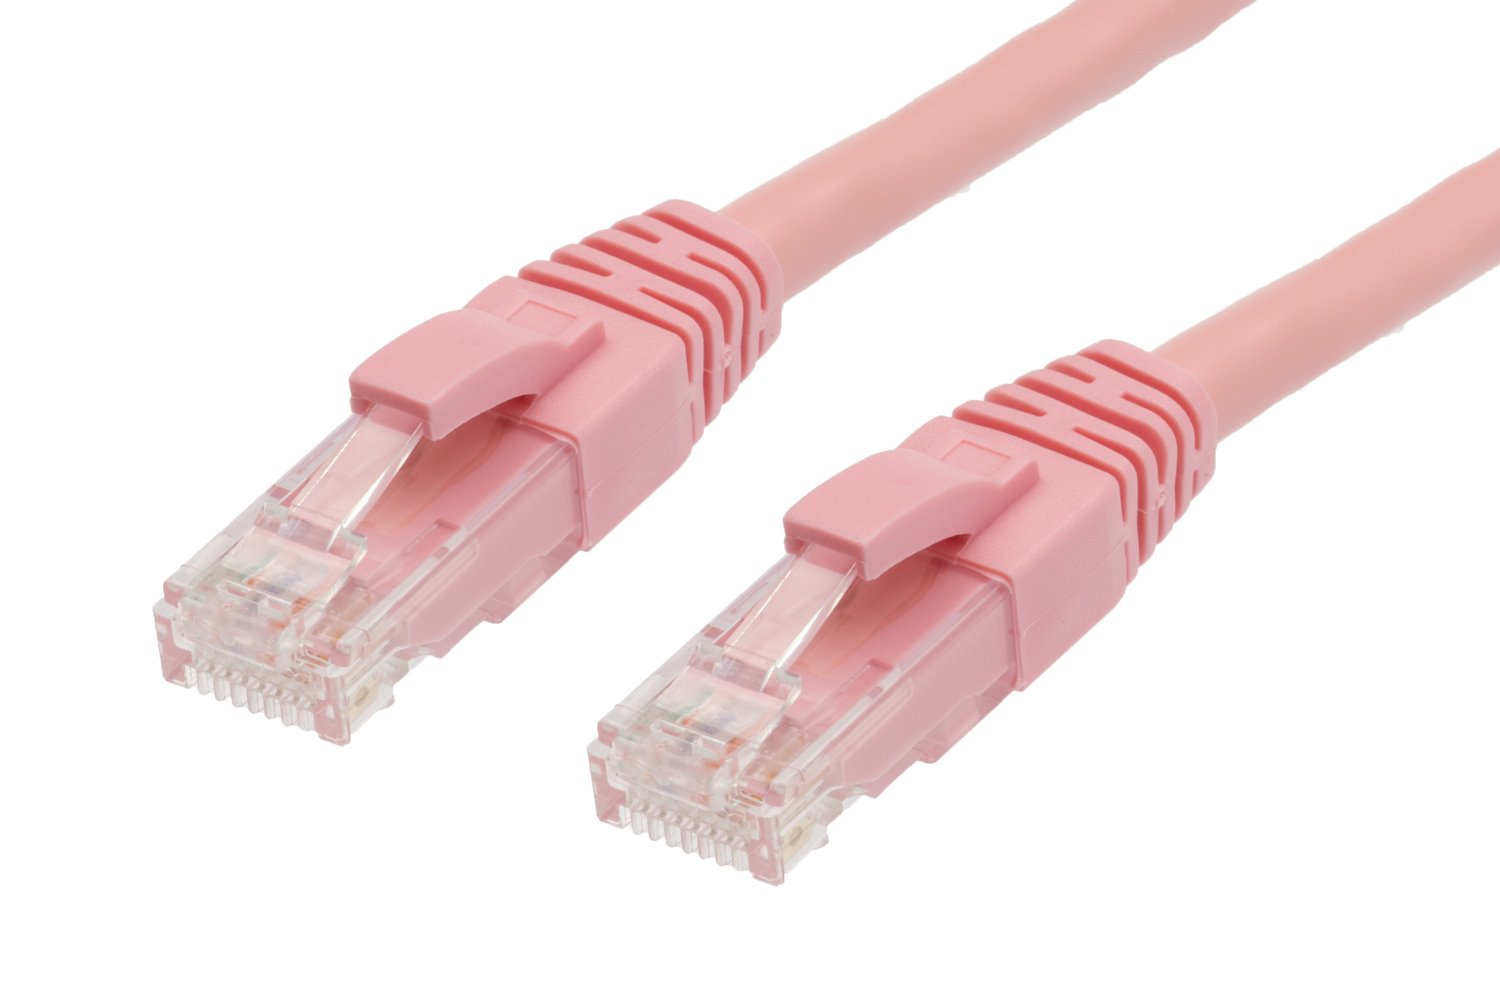 4Cabling 7M RJ45 Cat6 Ethernet Cable. Pink